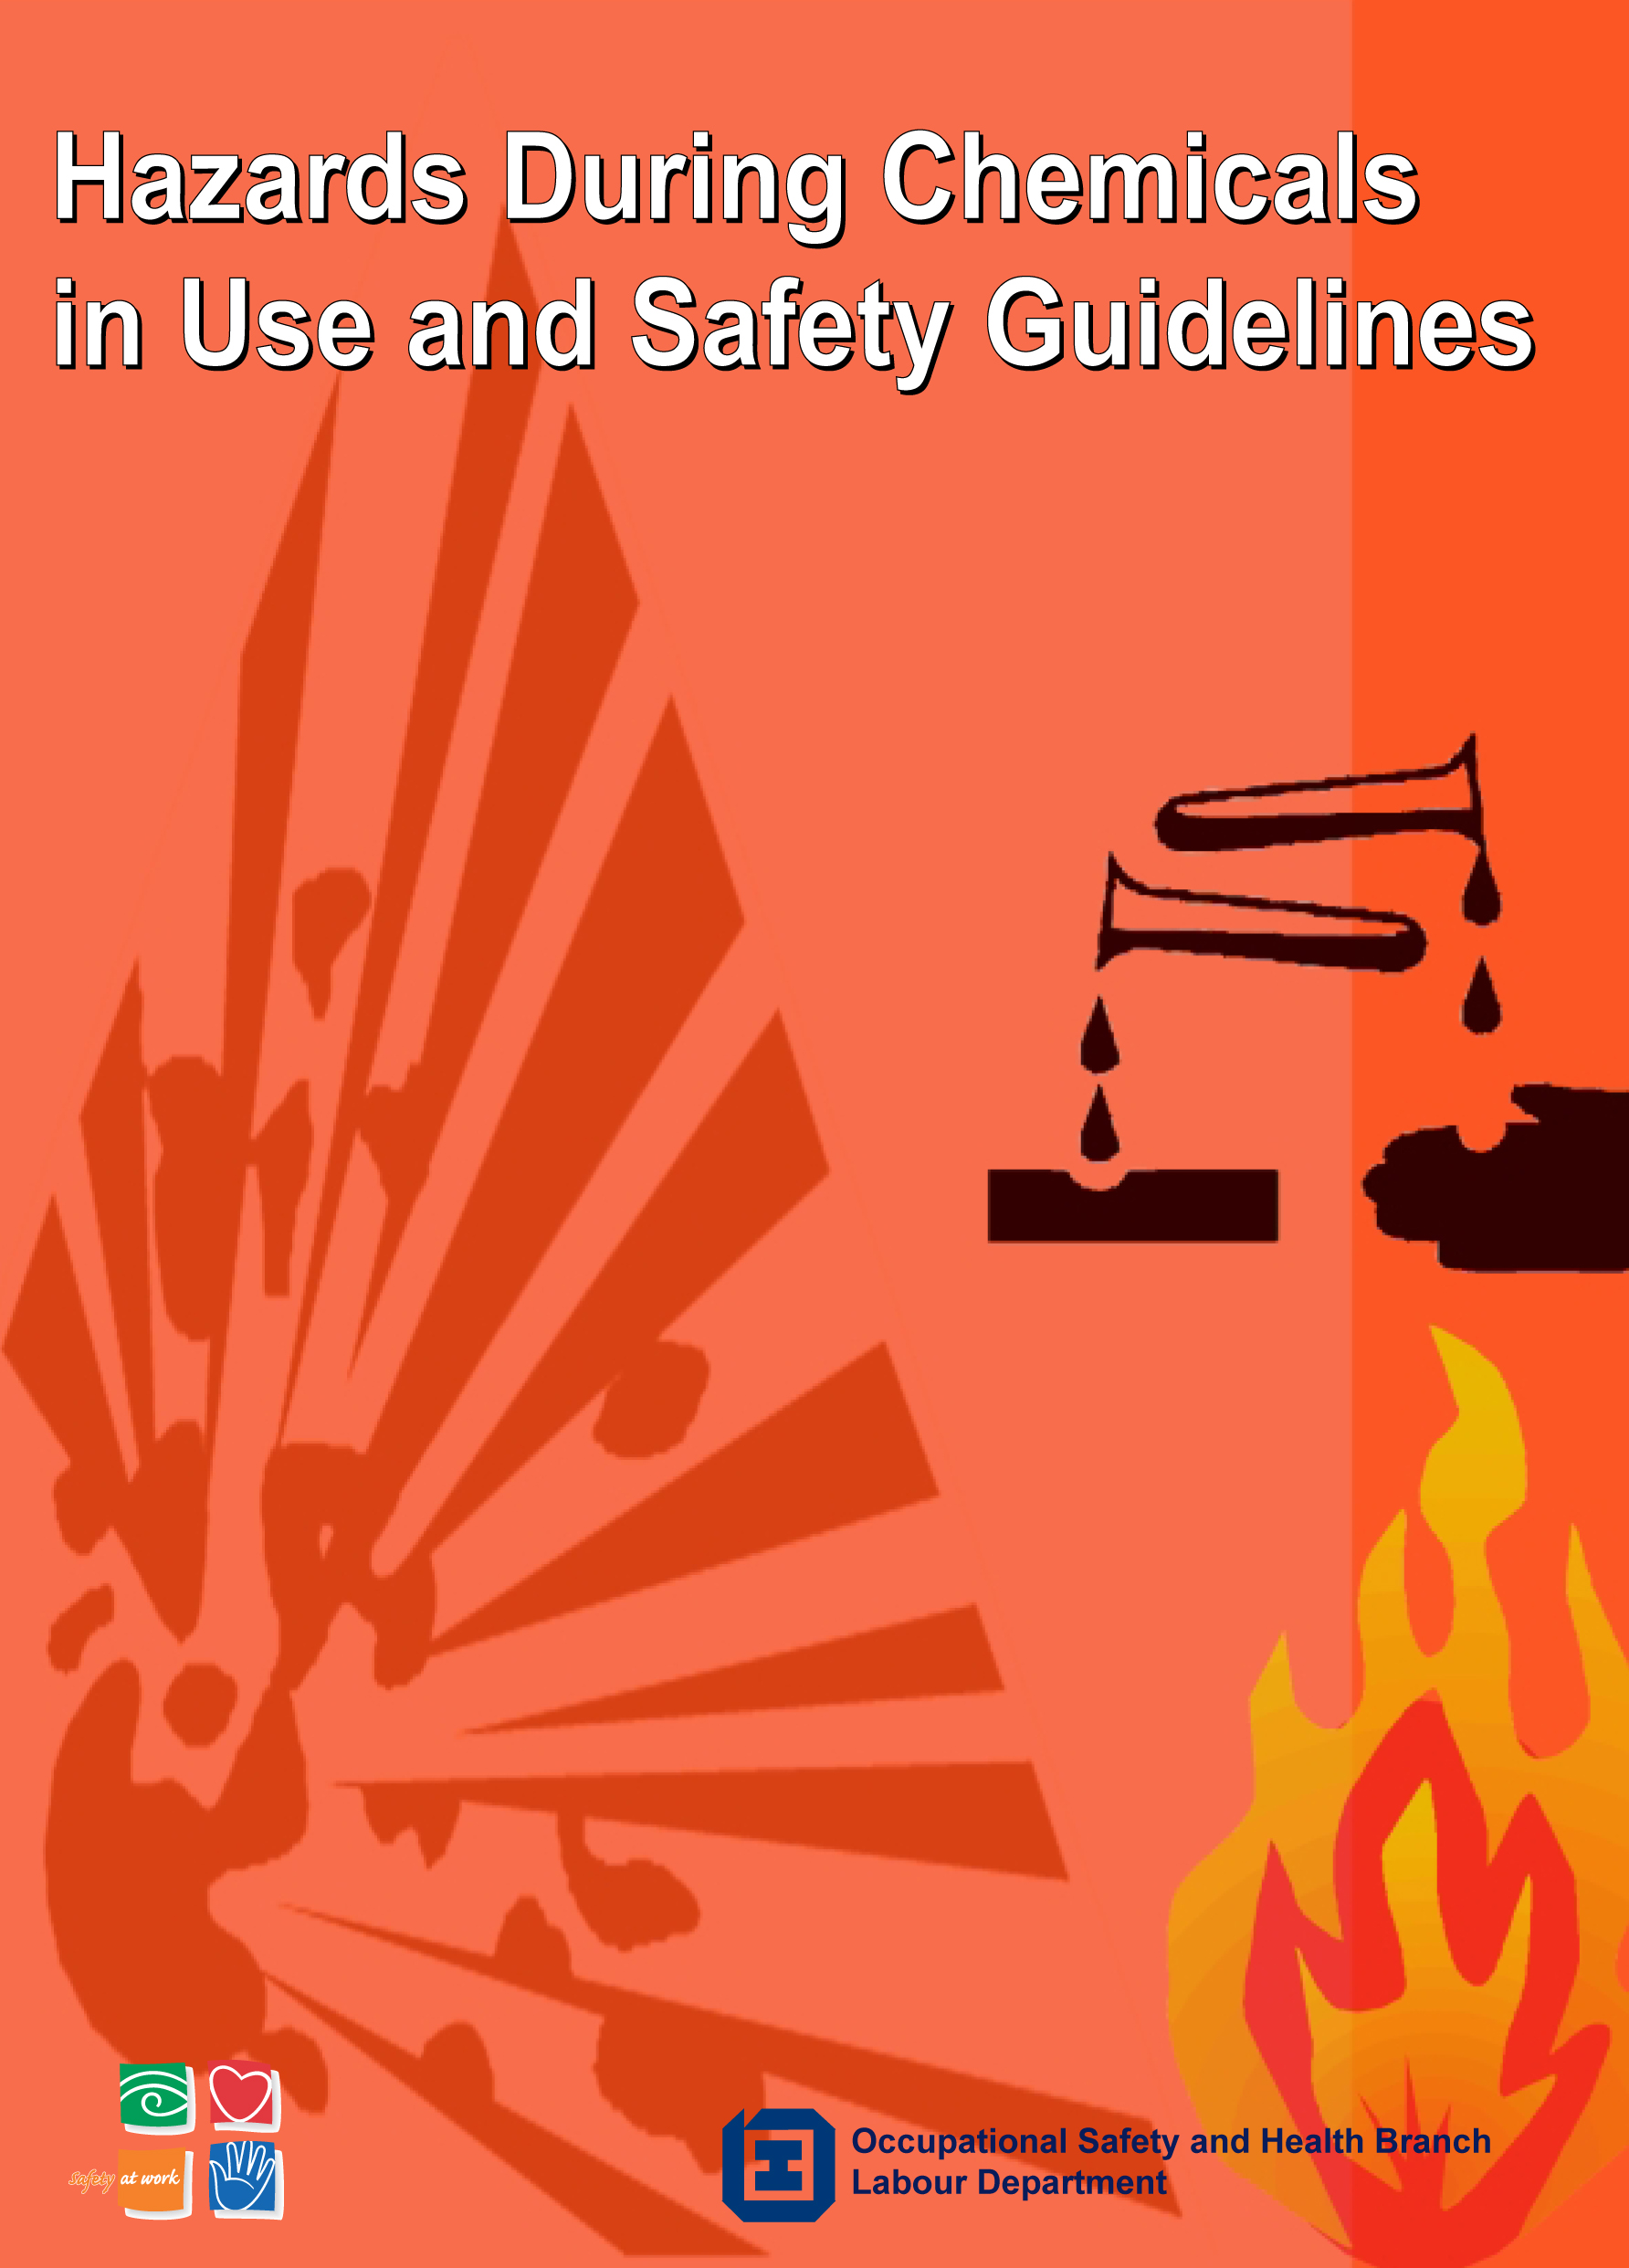 Hazards During Chemicals in Use and Safety Guidelines